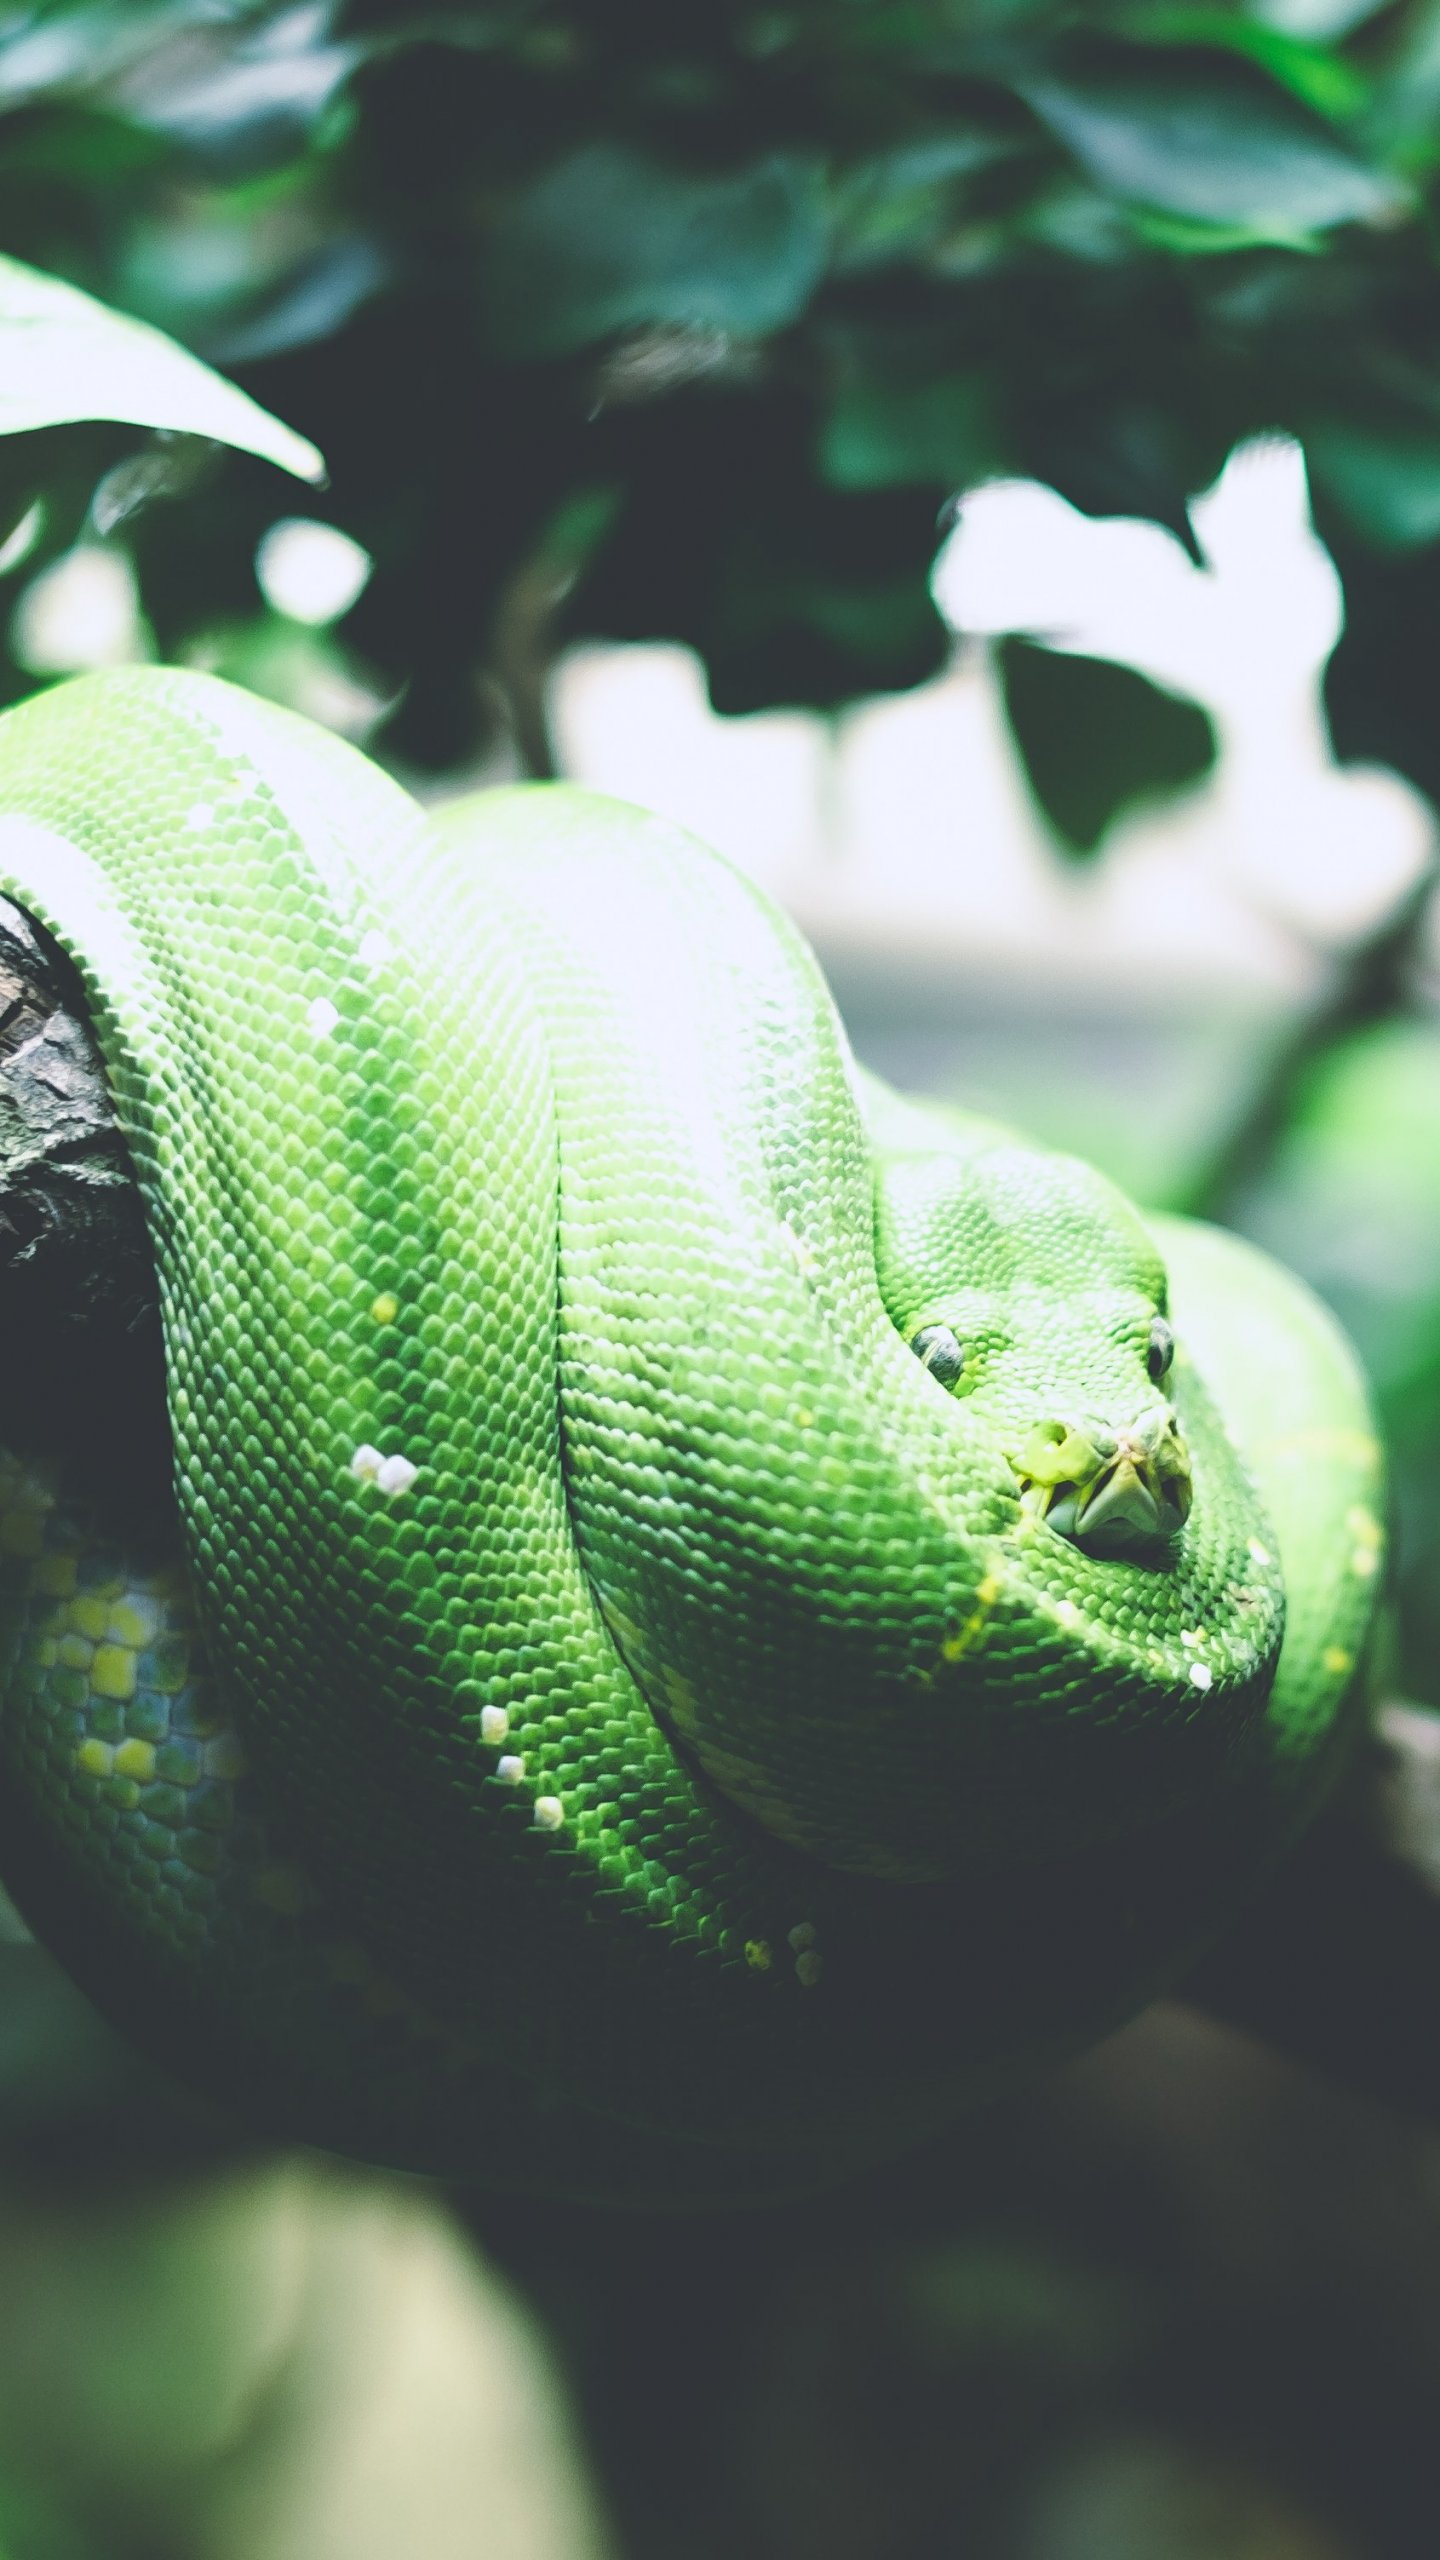 Harry Potter Slytherin Snake Wallpapers  Slytherin Wallpaper for iPhone